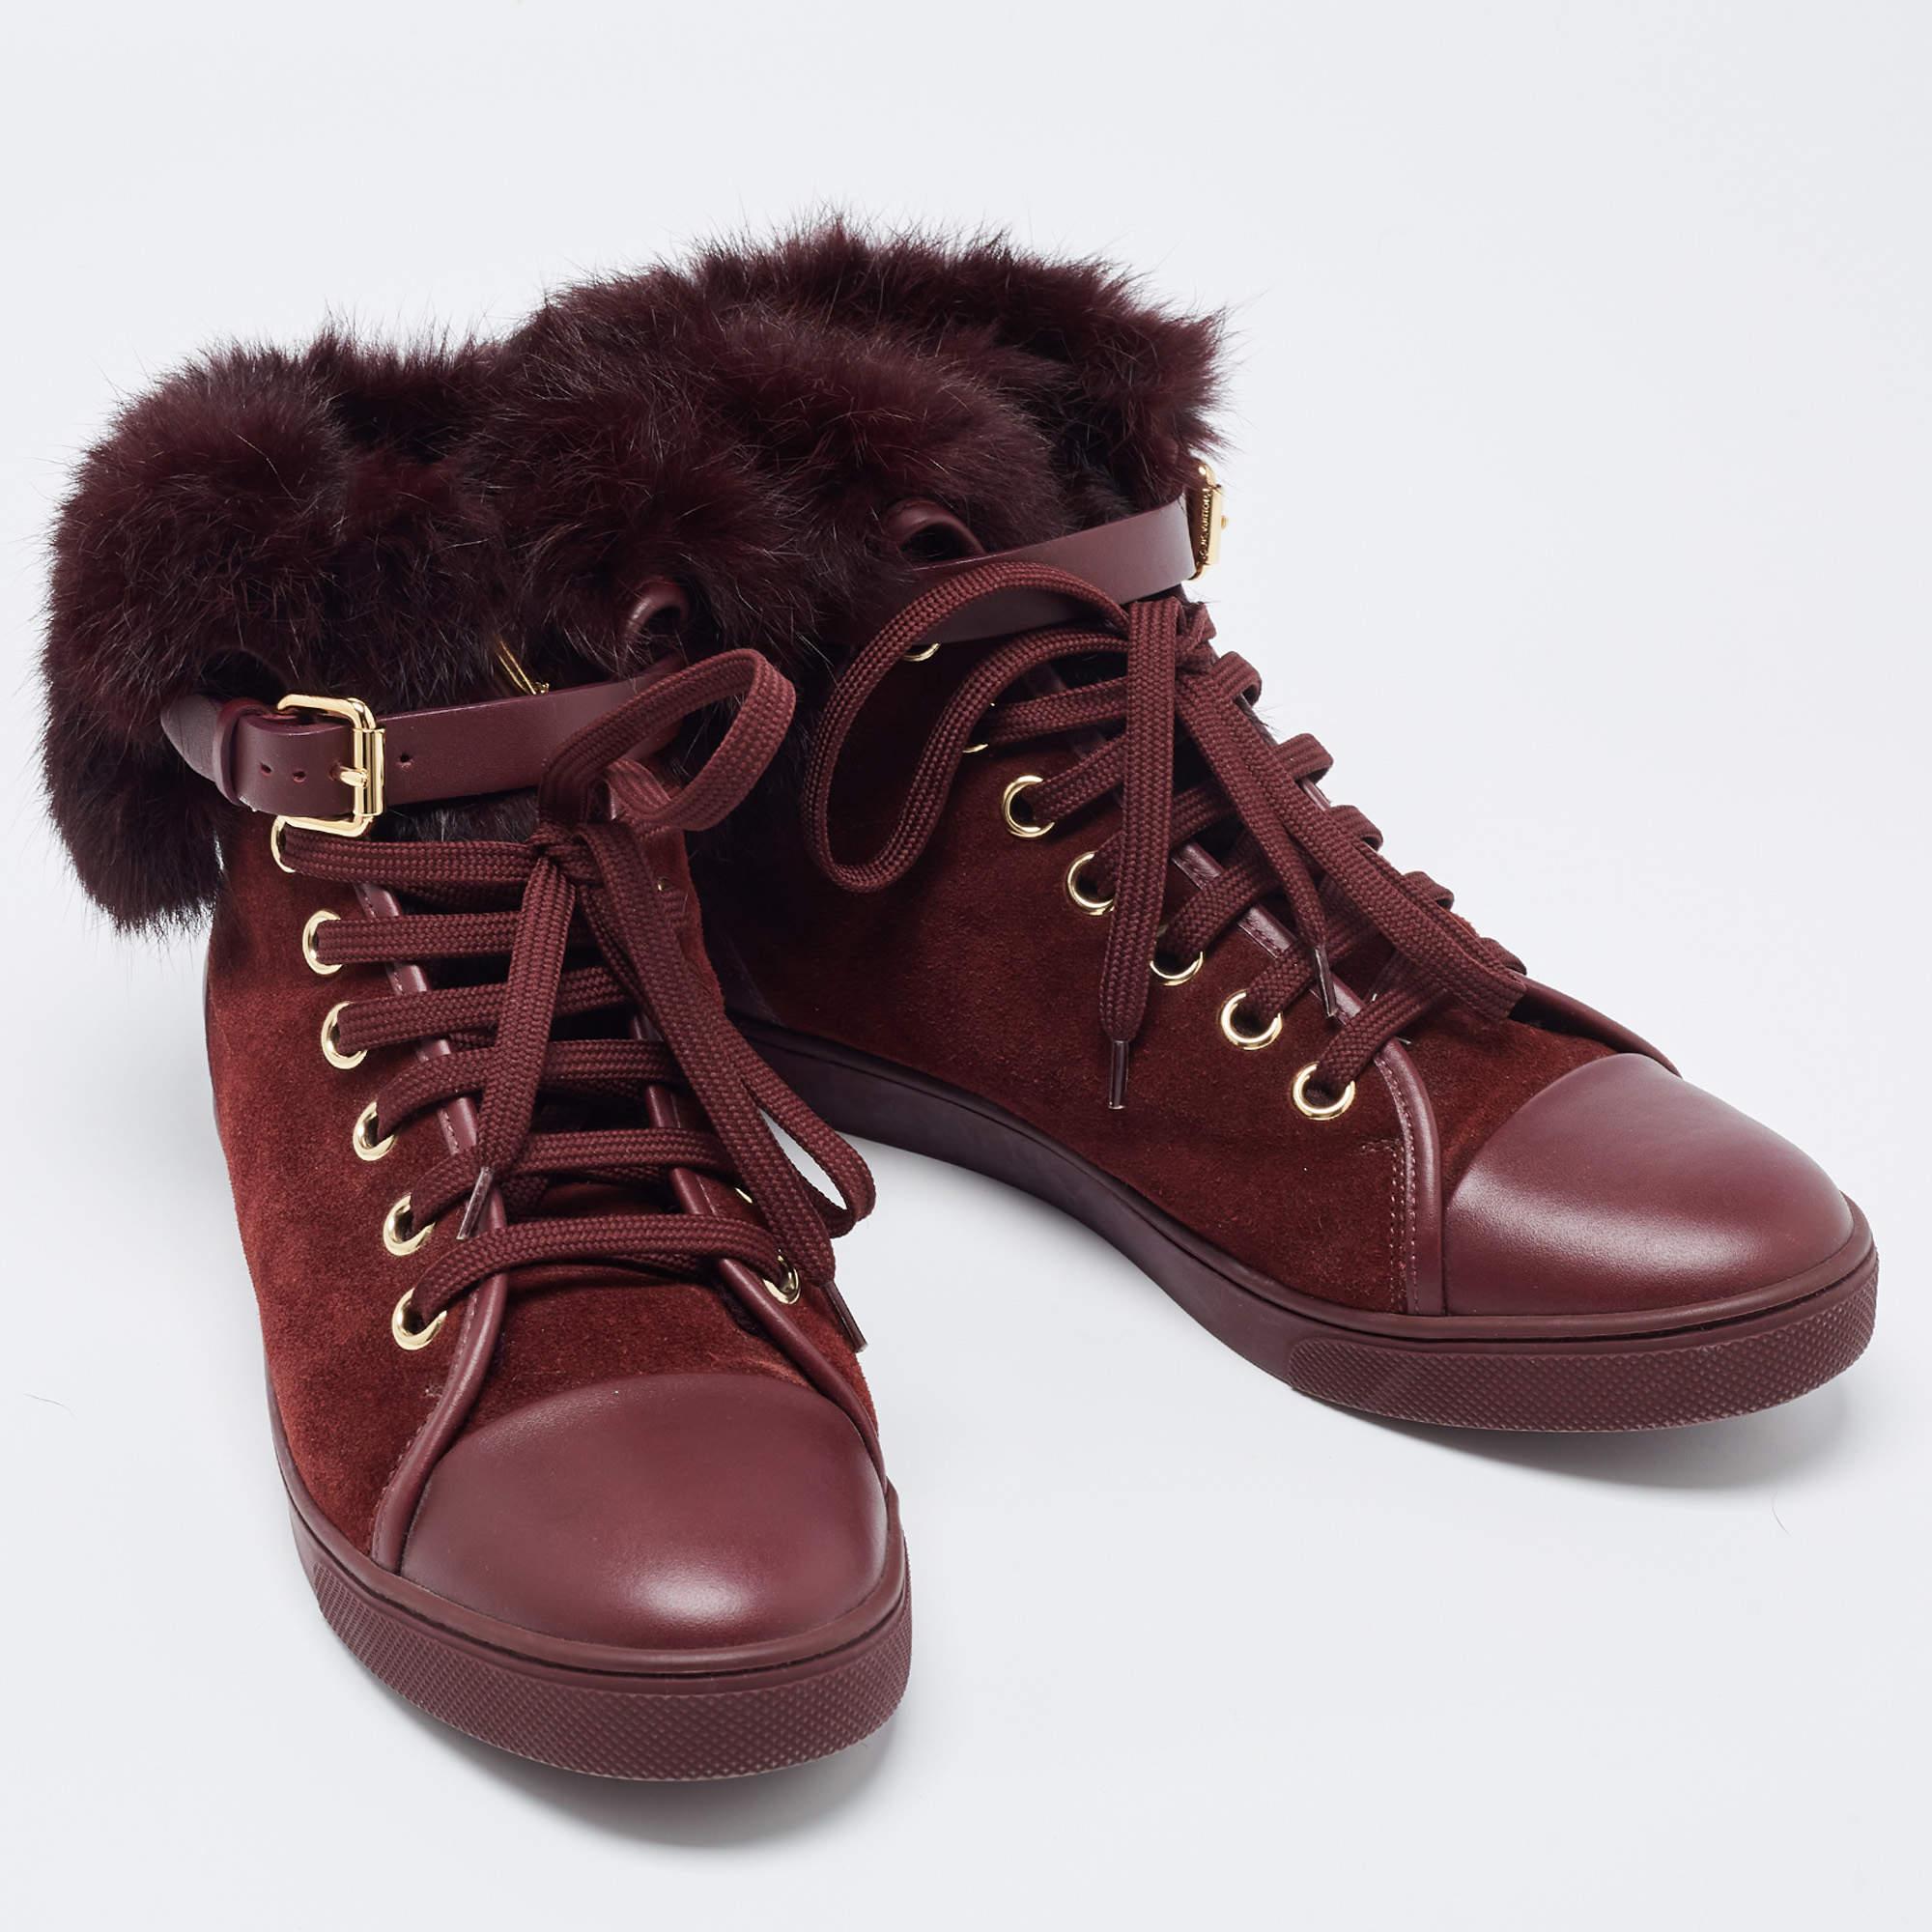 Women's Louis Vuitton Burgundy Suede, Leather and Fur High Top Sneakers Size 38.5